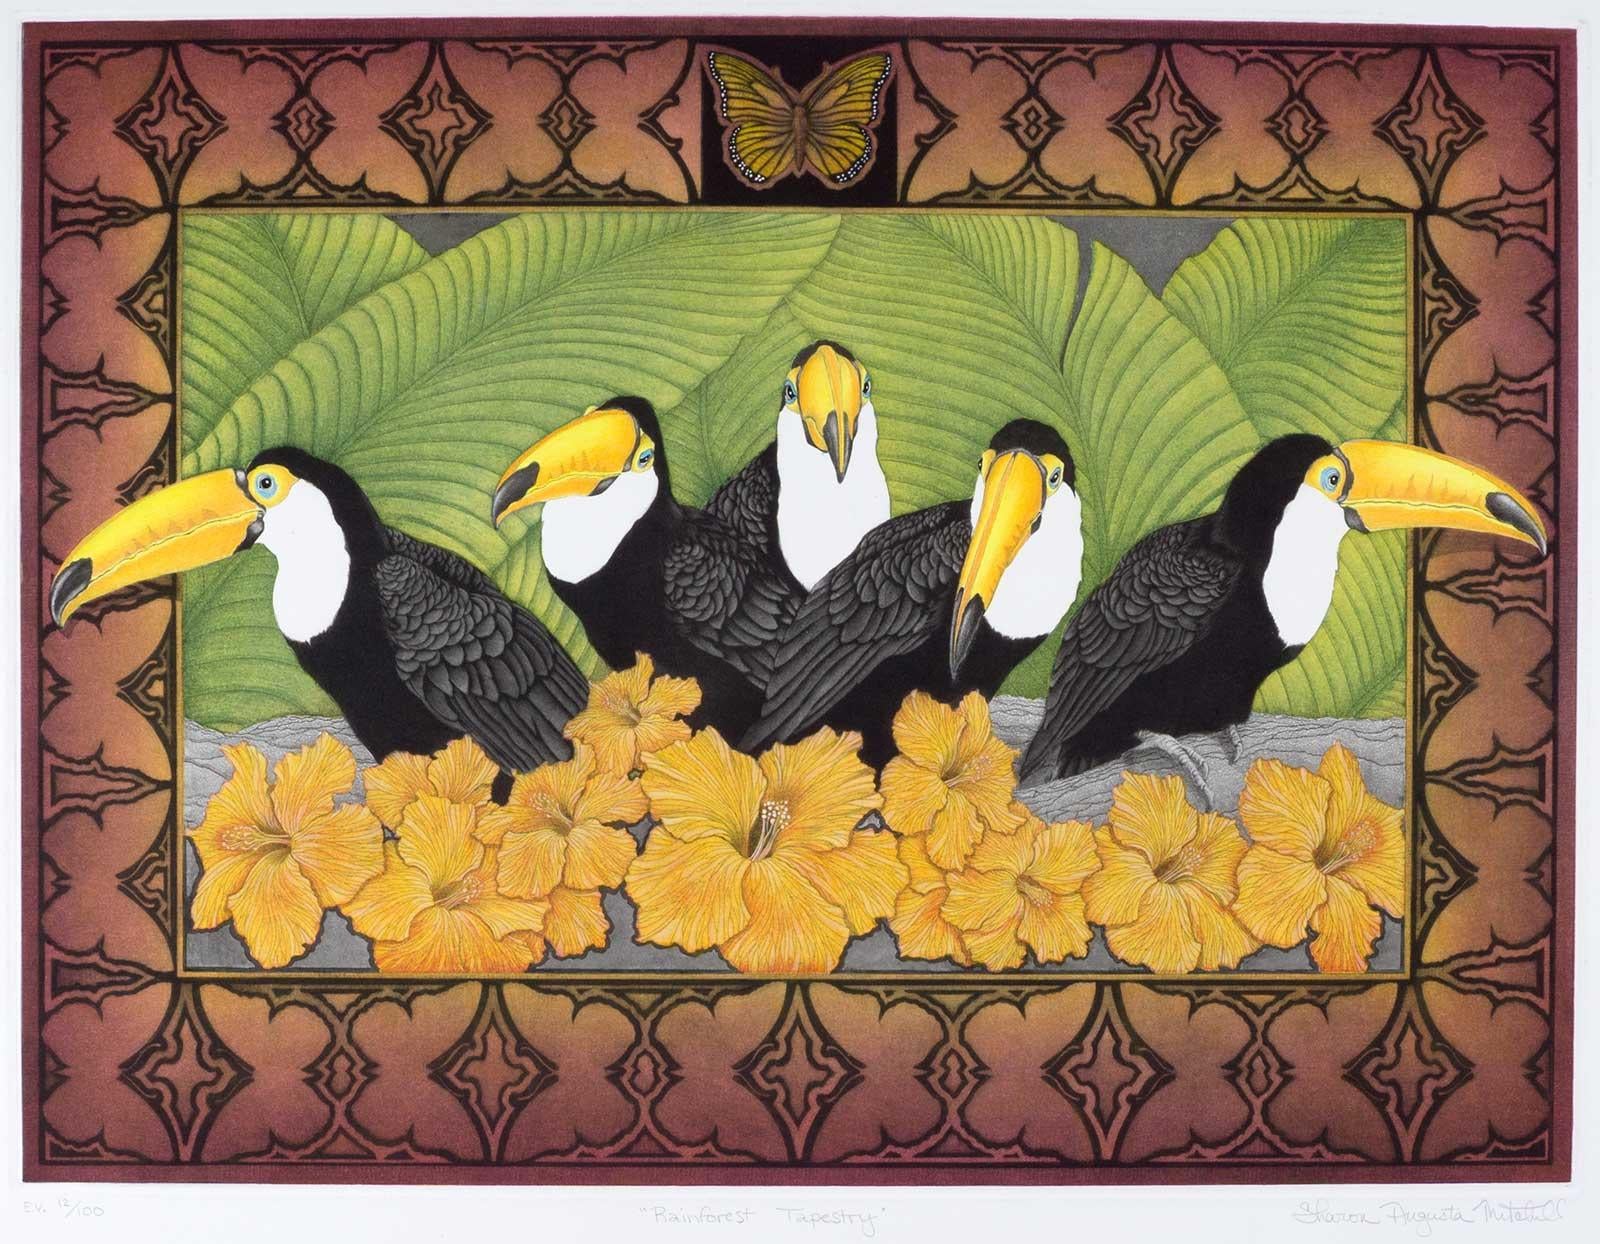 Sharon Augusta Mitchell created this vividly colored image of five toucans with bright yellow bills set against a background of green tropical ferns and bright orange flowers.  The image combines drypoint, mezzotint and aquatint with drawing and was